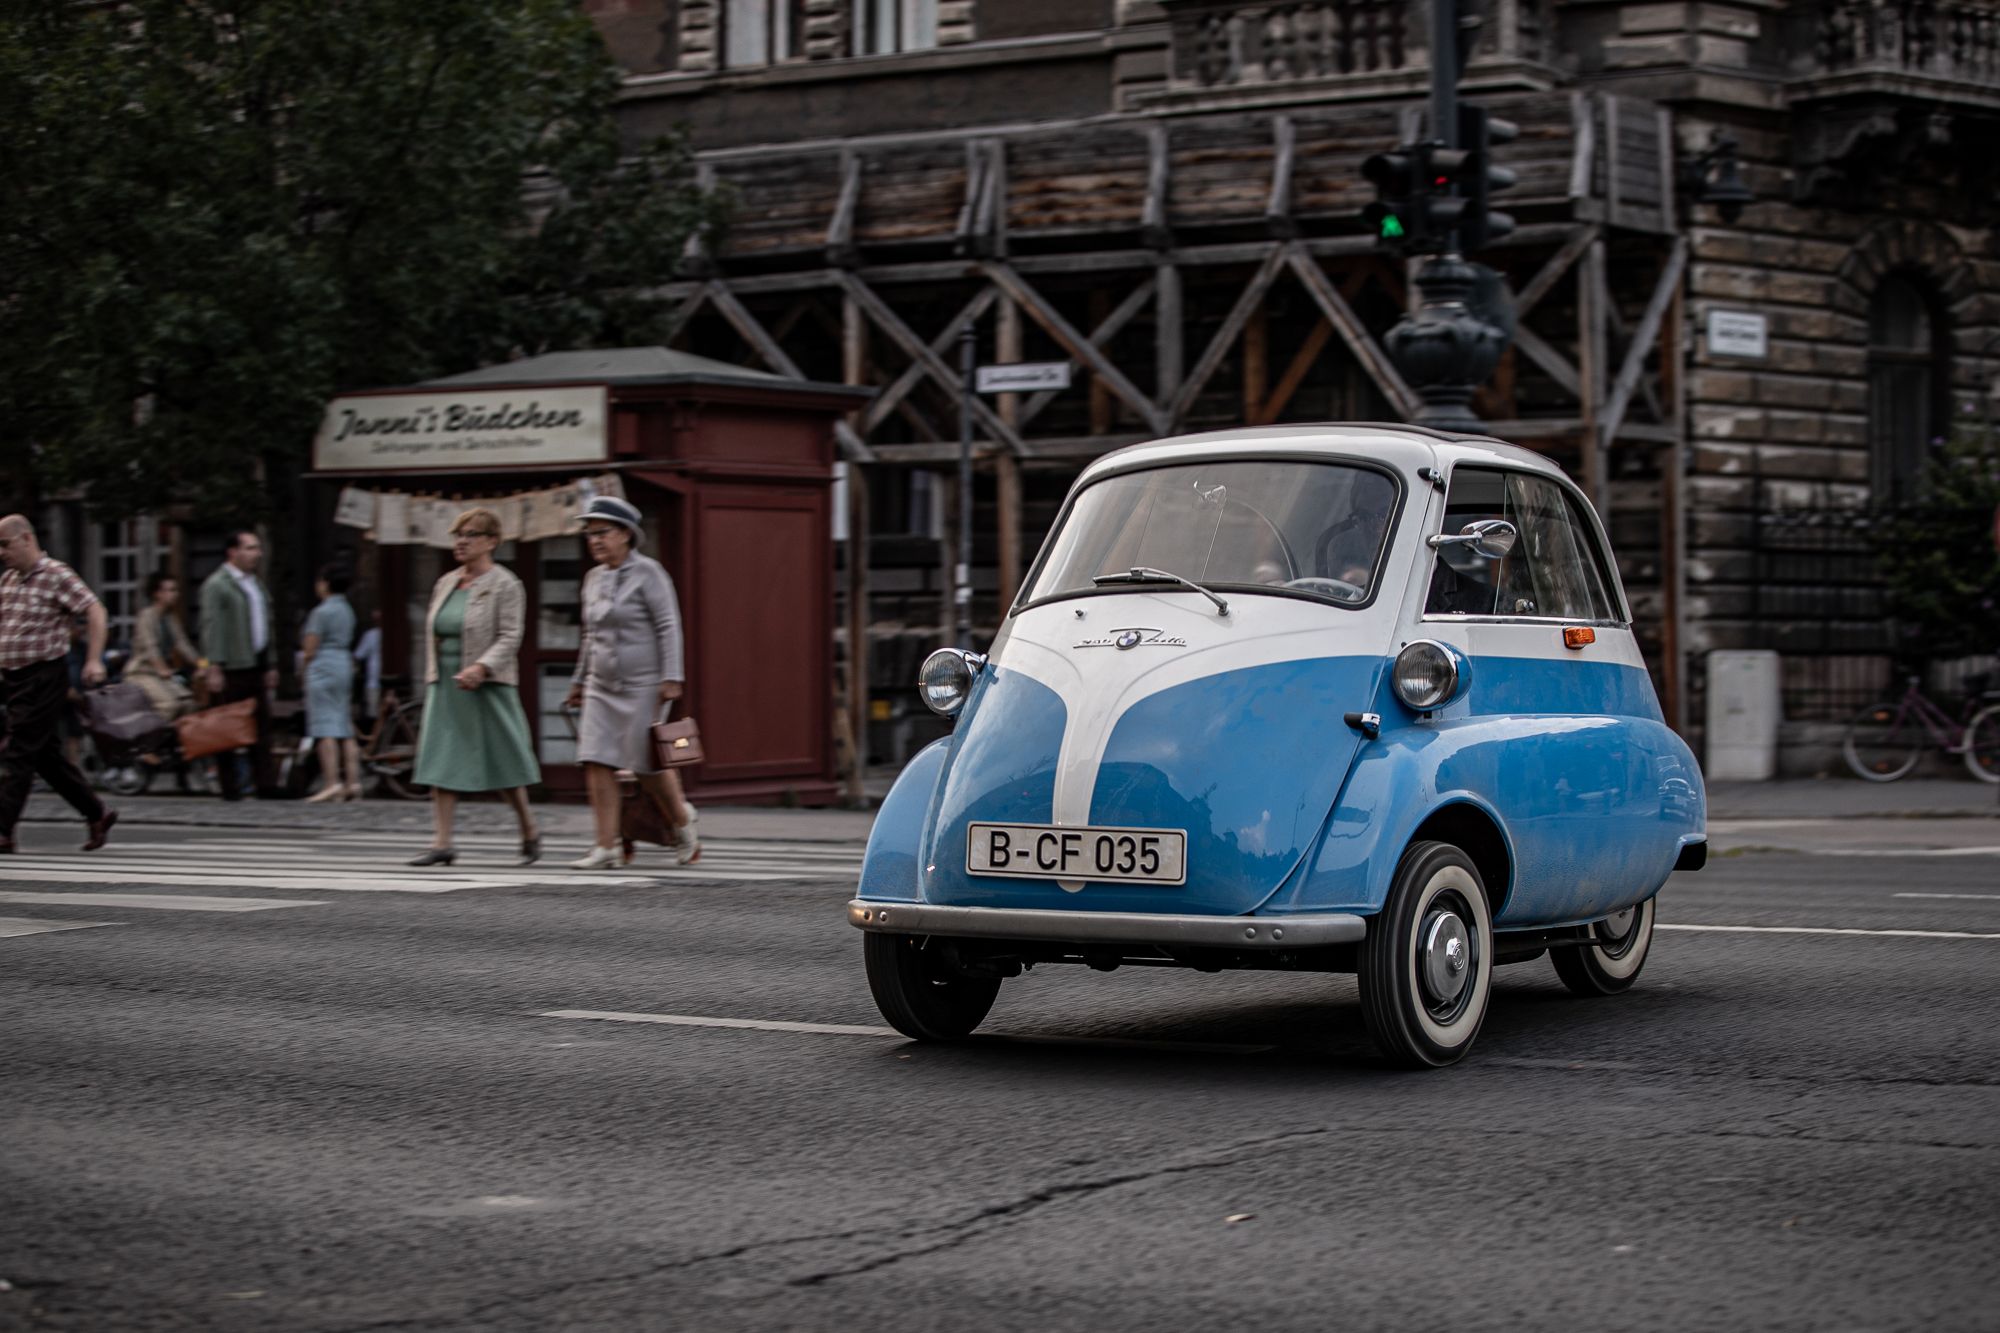 BMW Isetta Bubble Car In White And Blue